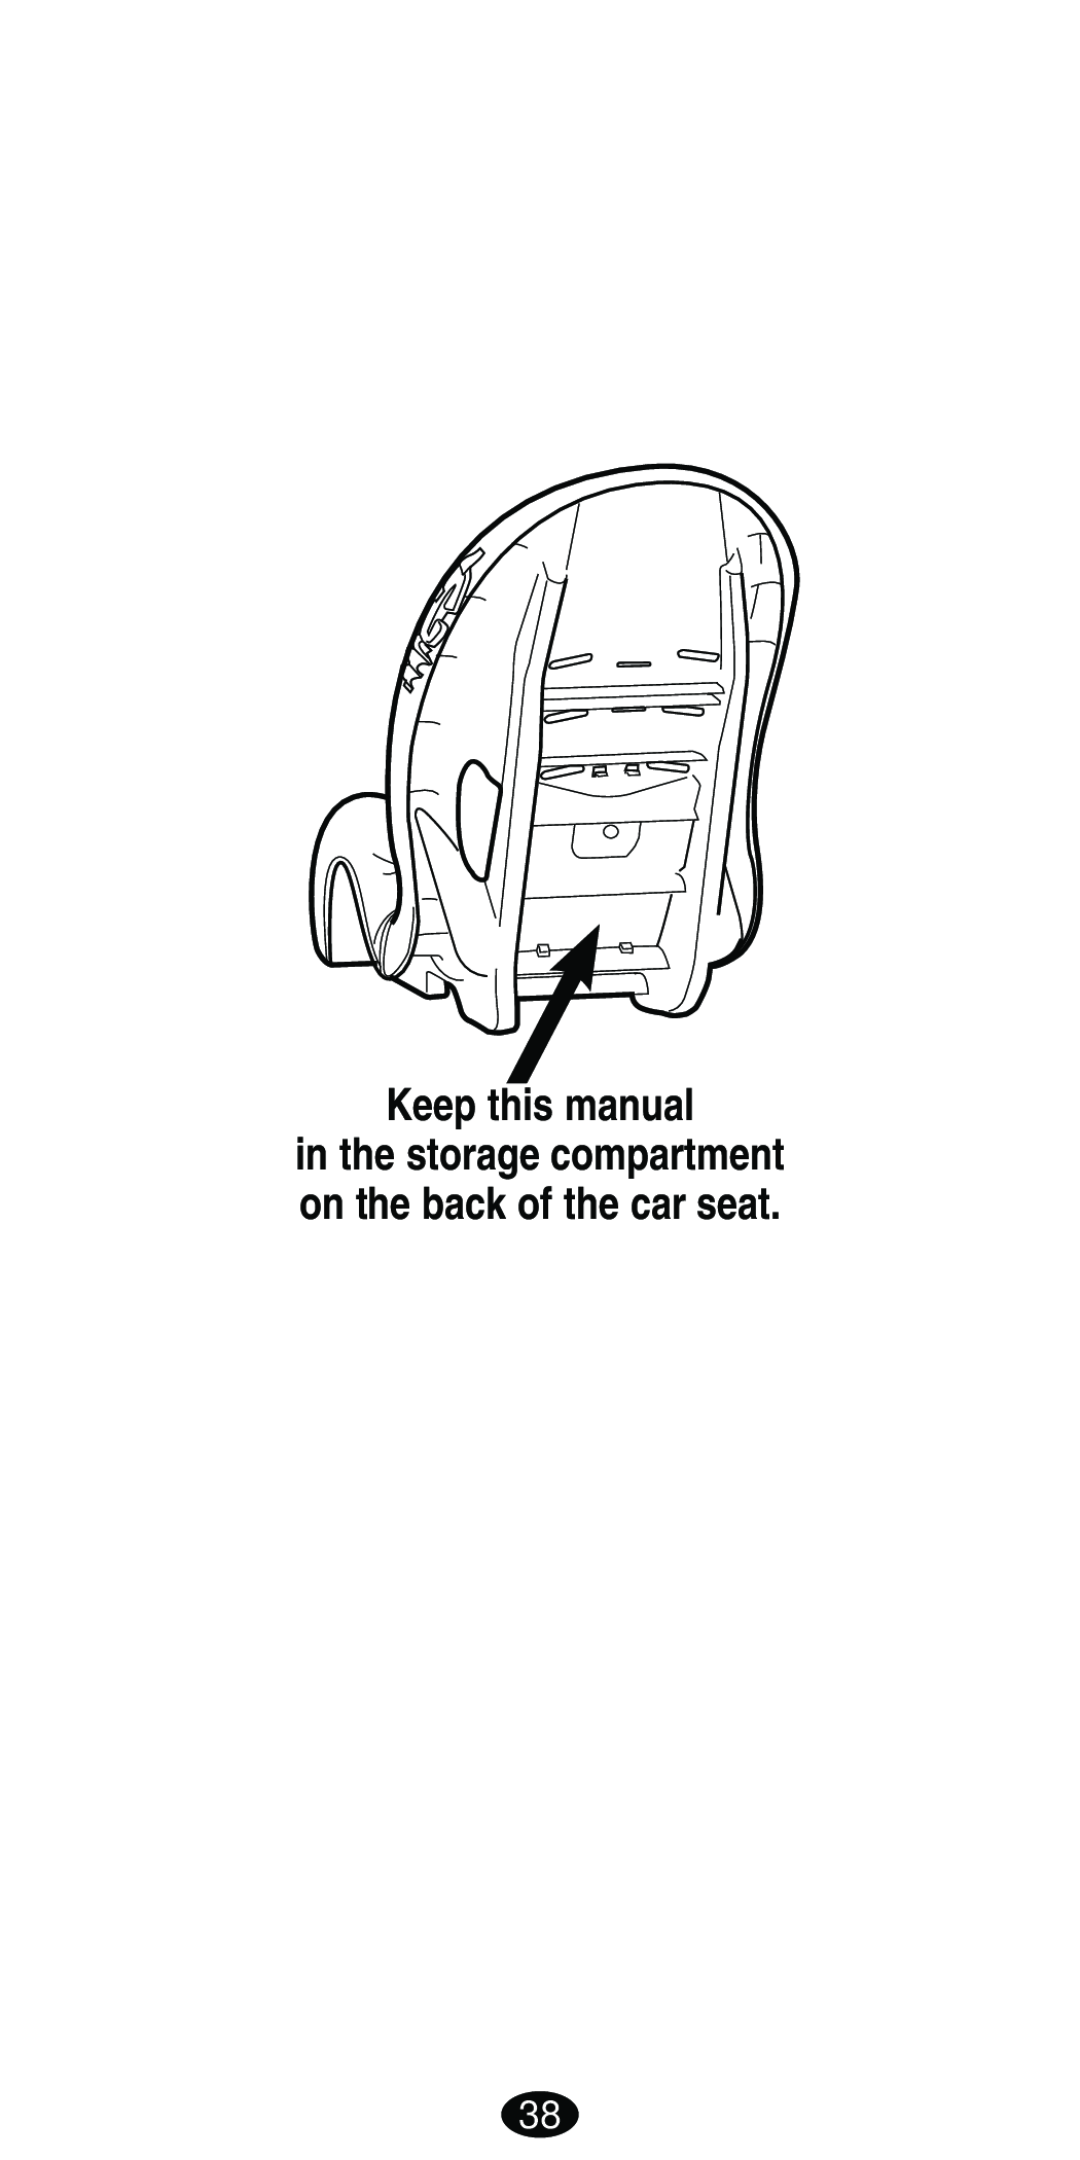 Graco Car Seat/Booster Keep this manual, in the storage compartment on the back of the car seat 